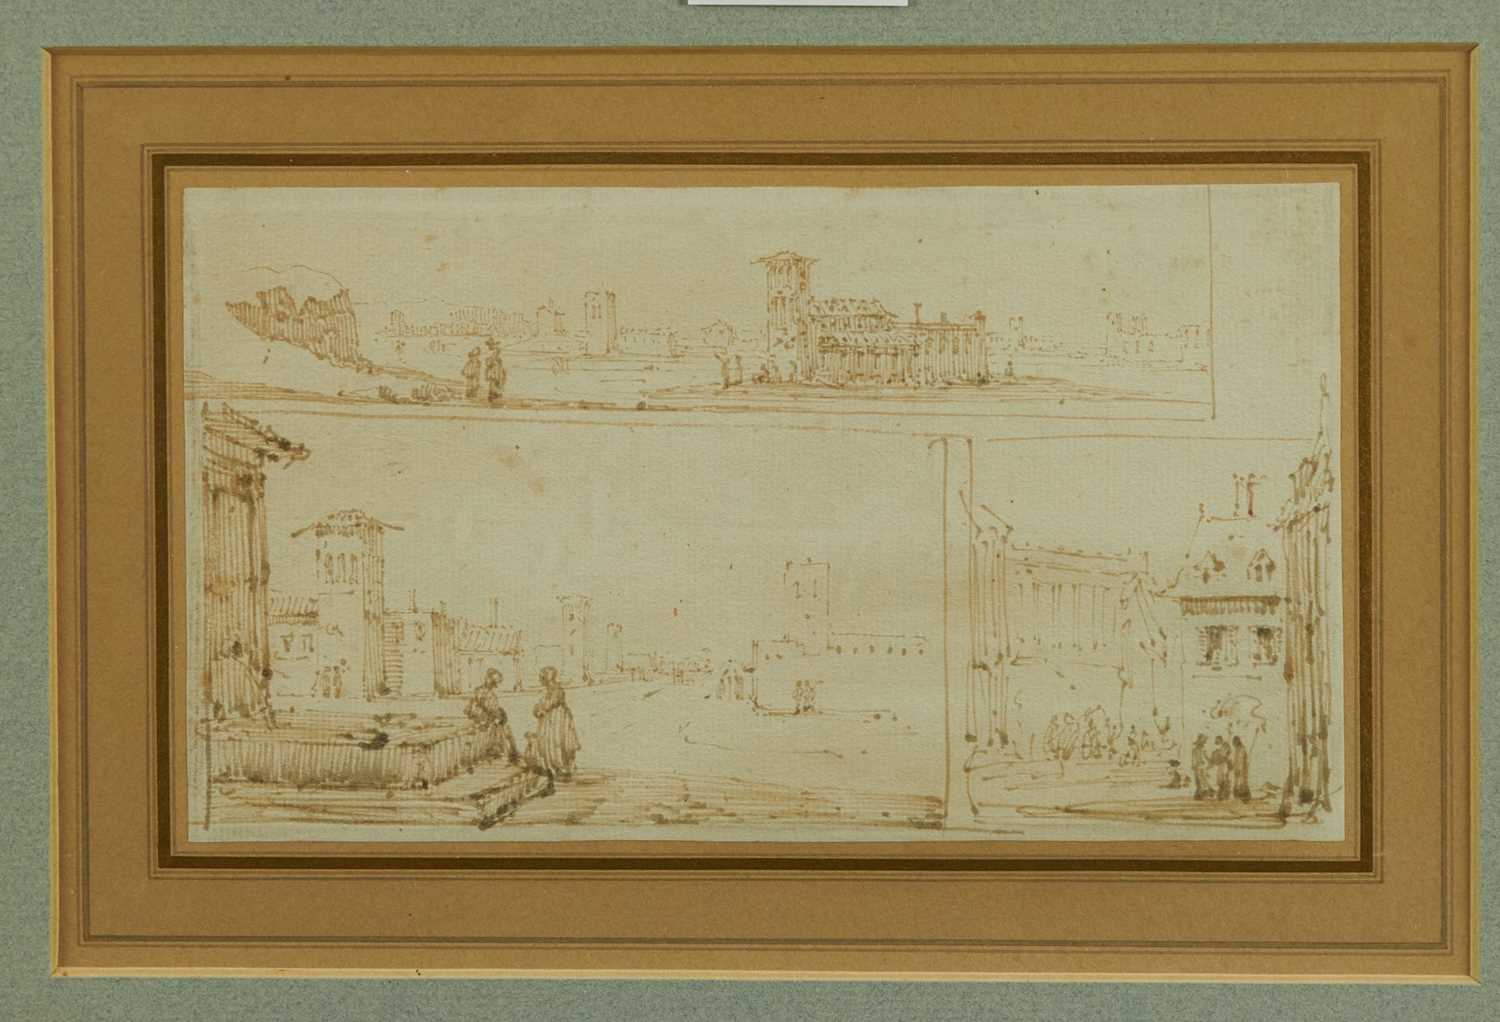 George Chinnery (1774-1852) pen and ink on paper - Eastern street scenes, 20cm x 11.5cm, mounted in - Image 11 of 20